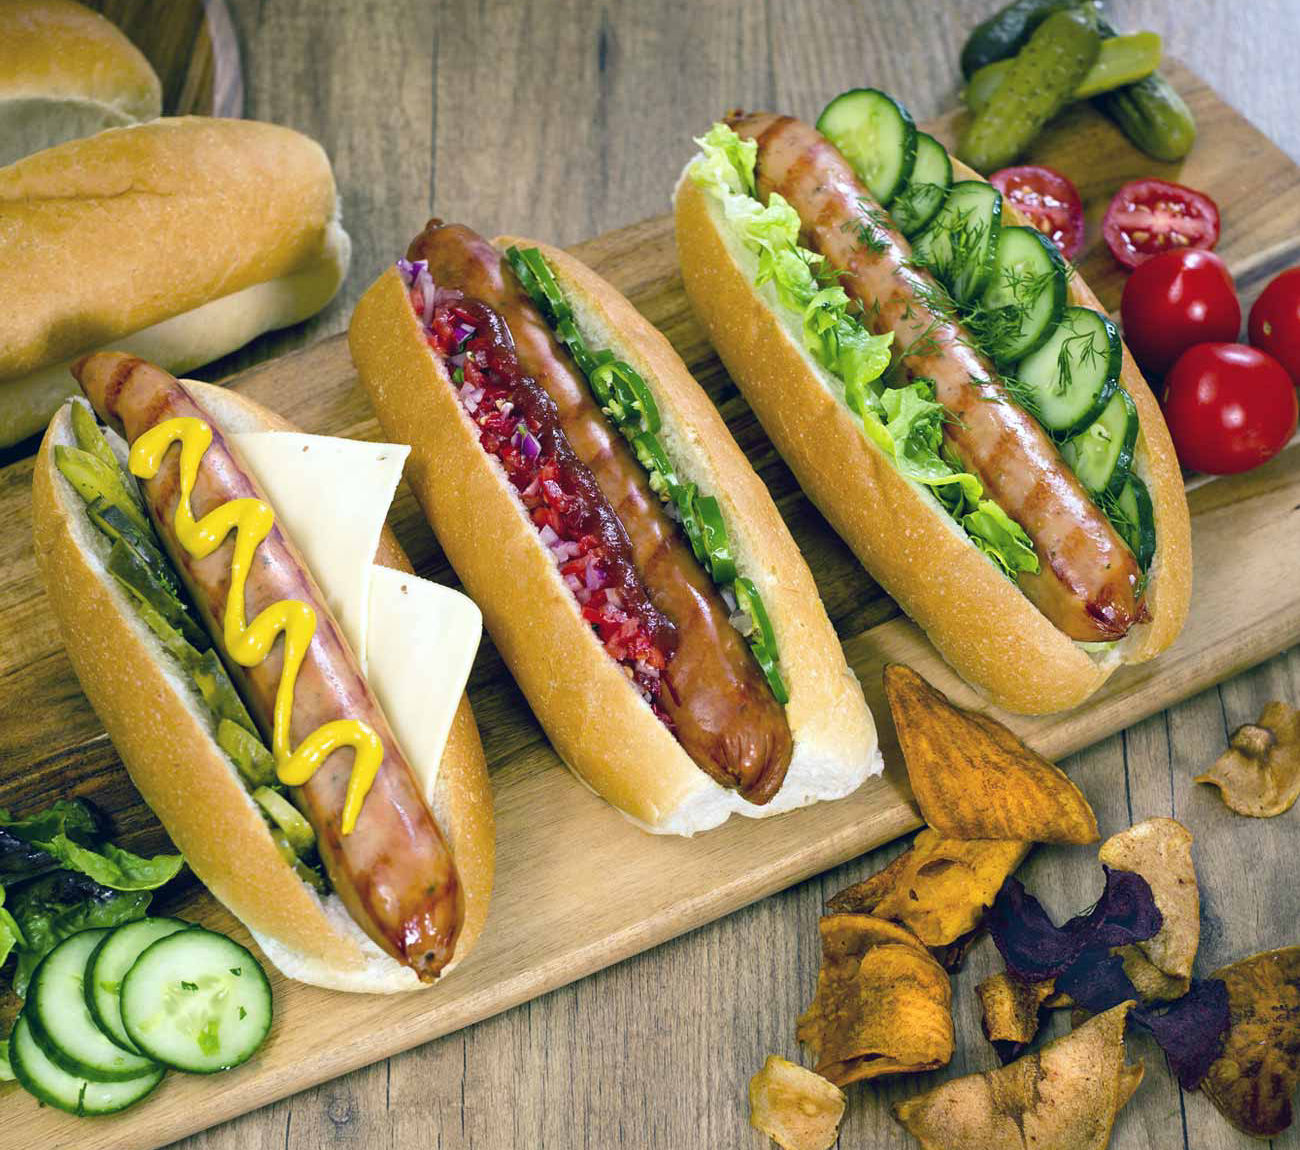 Gourmet Hot Dogs – a Bratwurst special – The Sausage Man